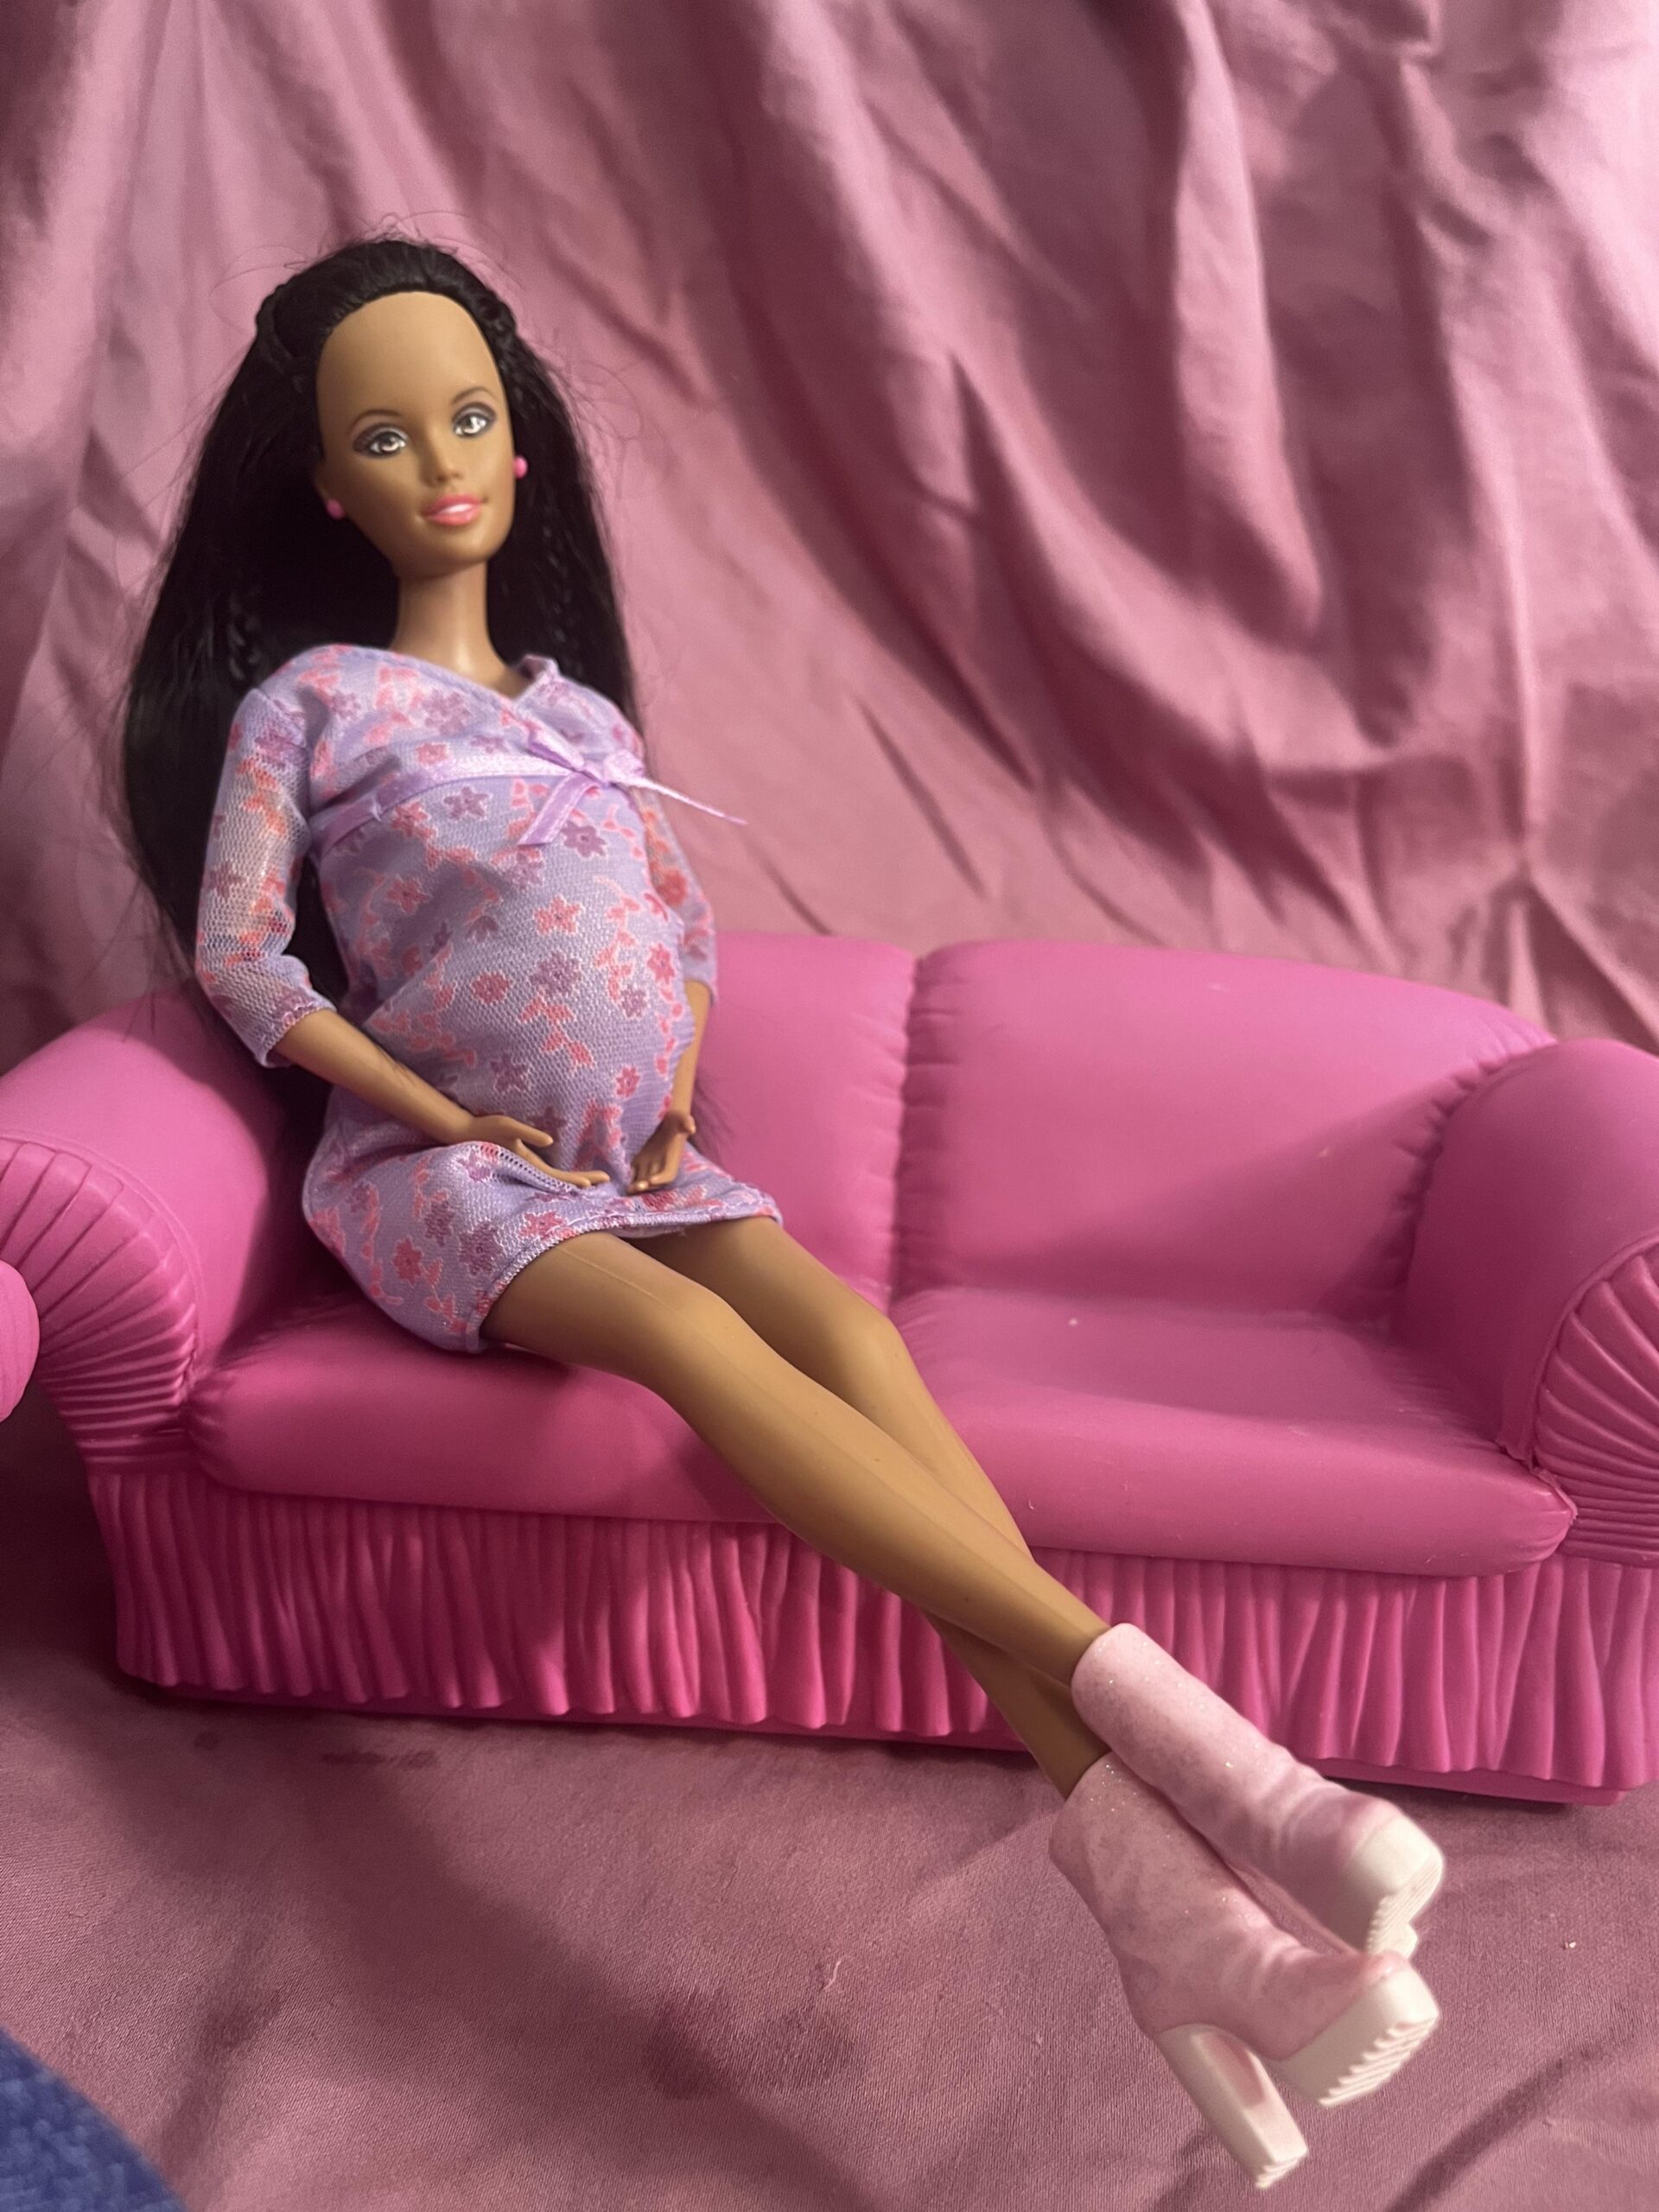 8 facts about barbie that will leave you with an identity crisis... For just a bit